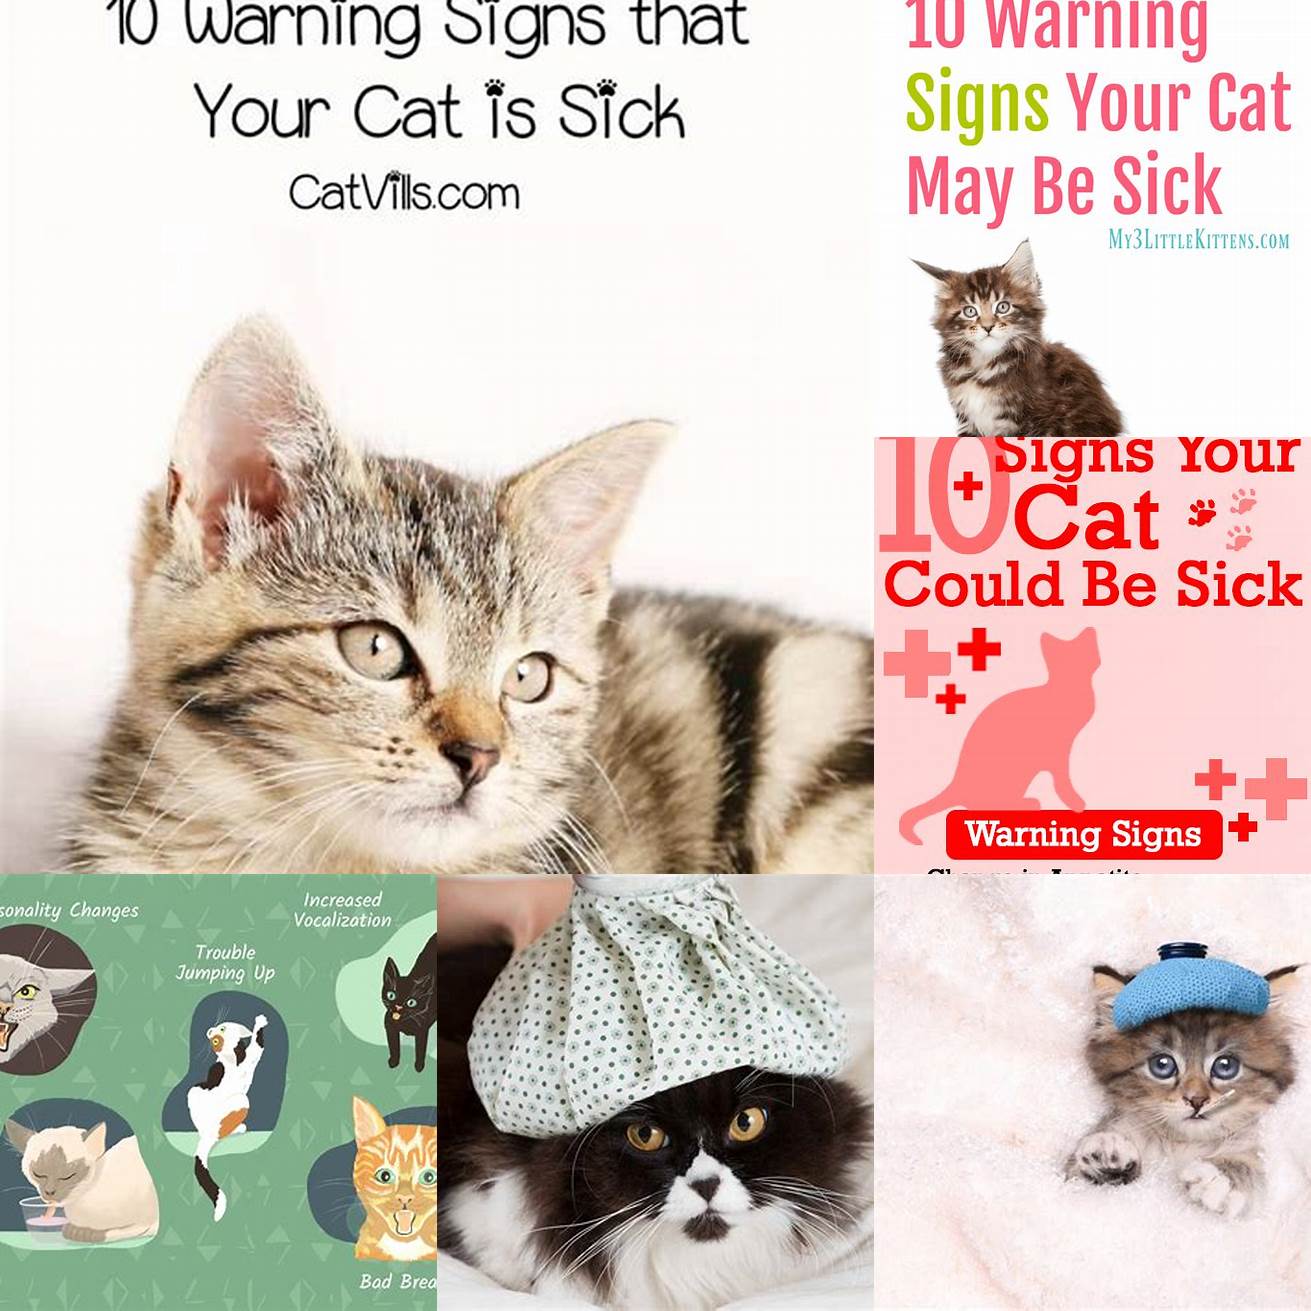 Limit contact with your cat if you are sick